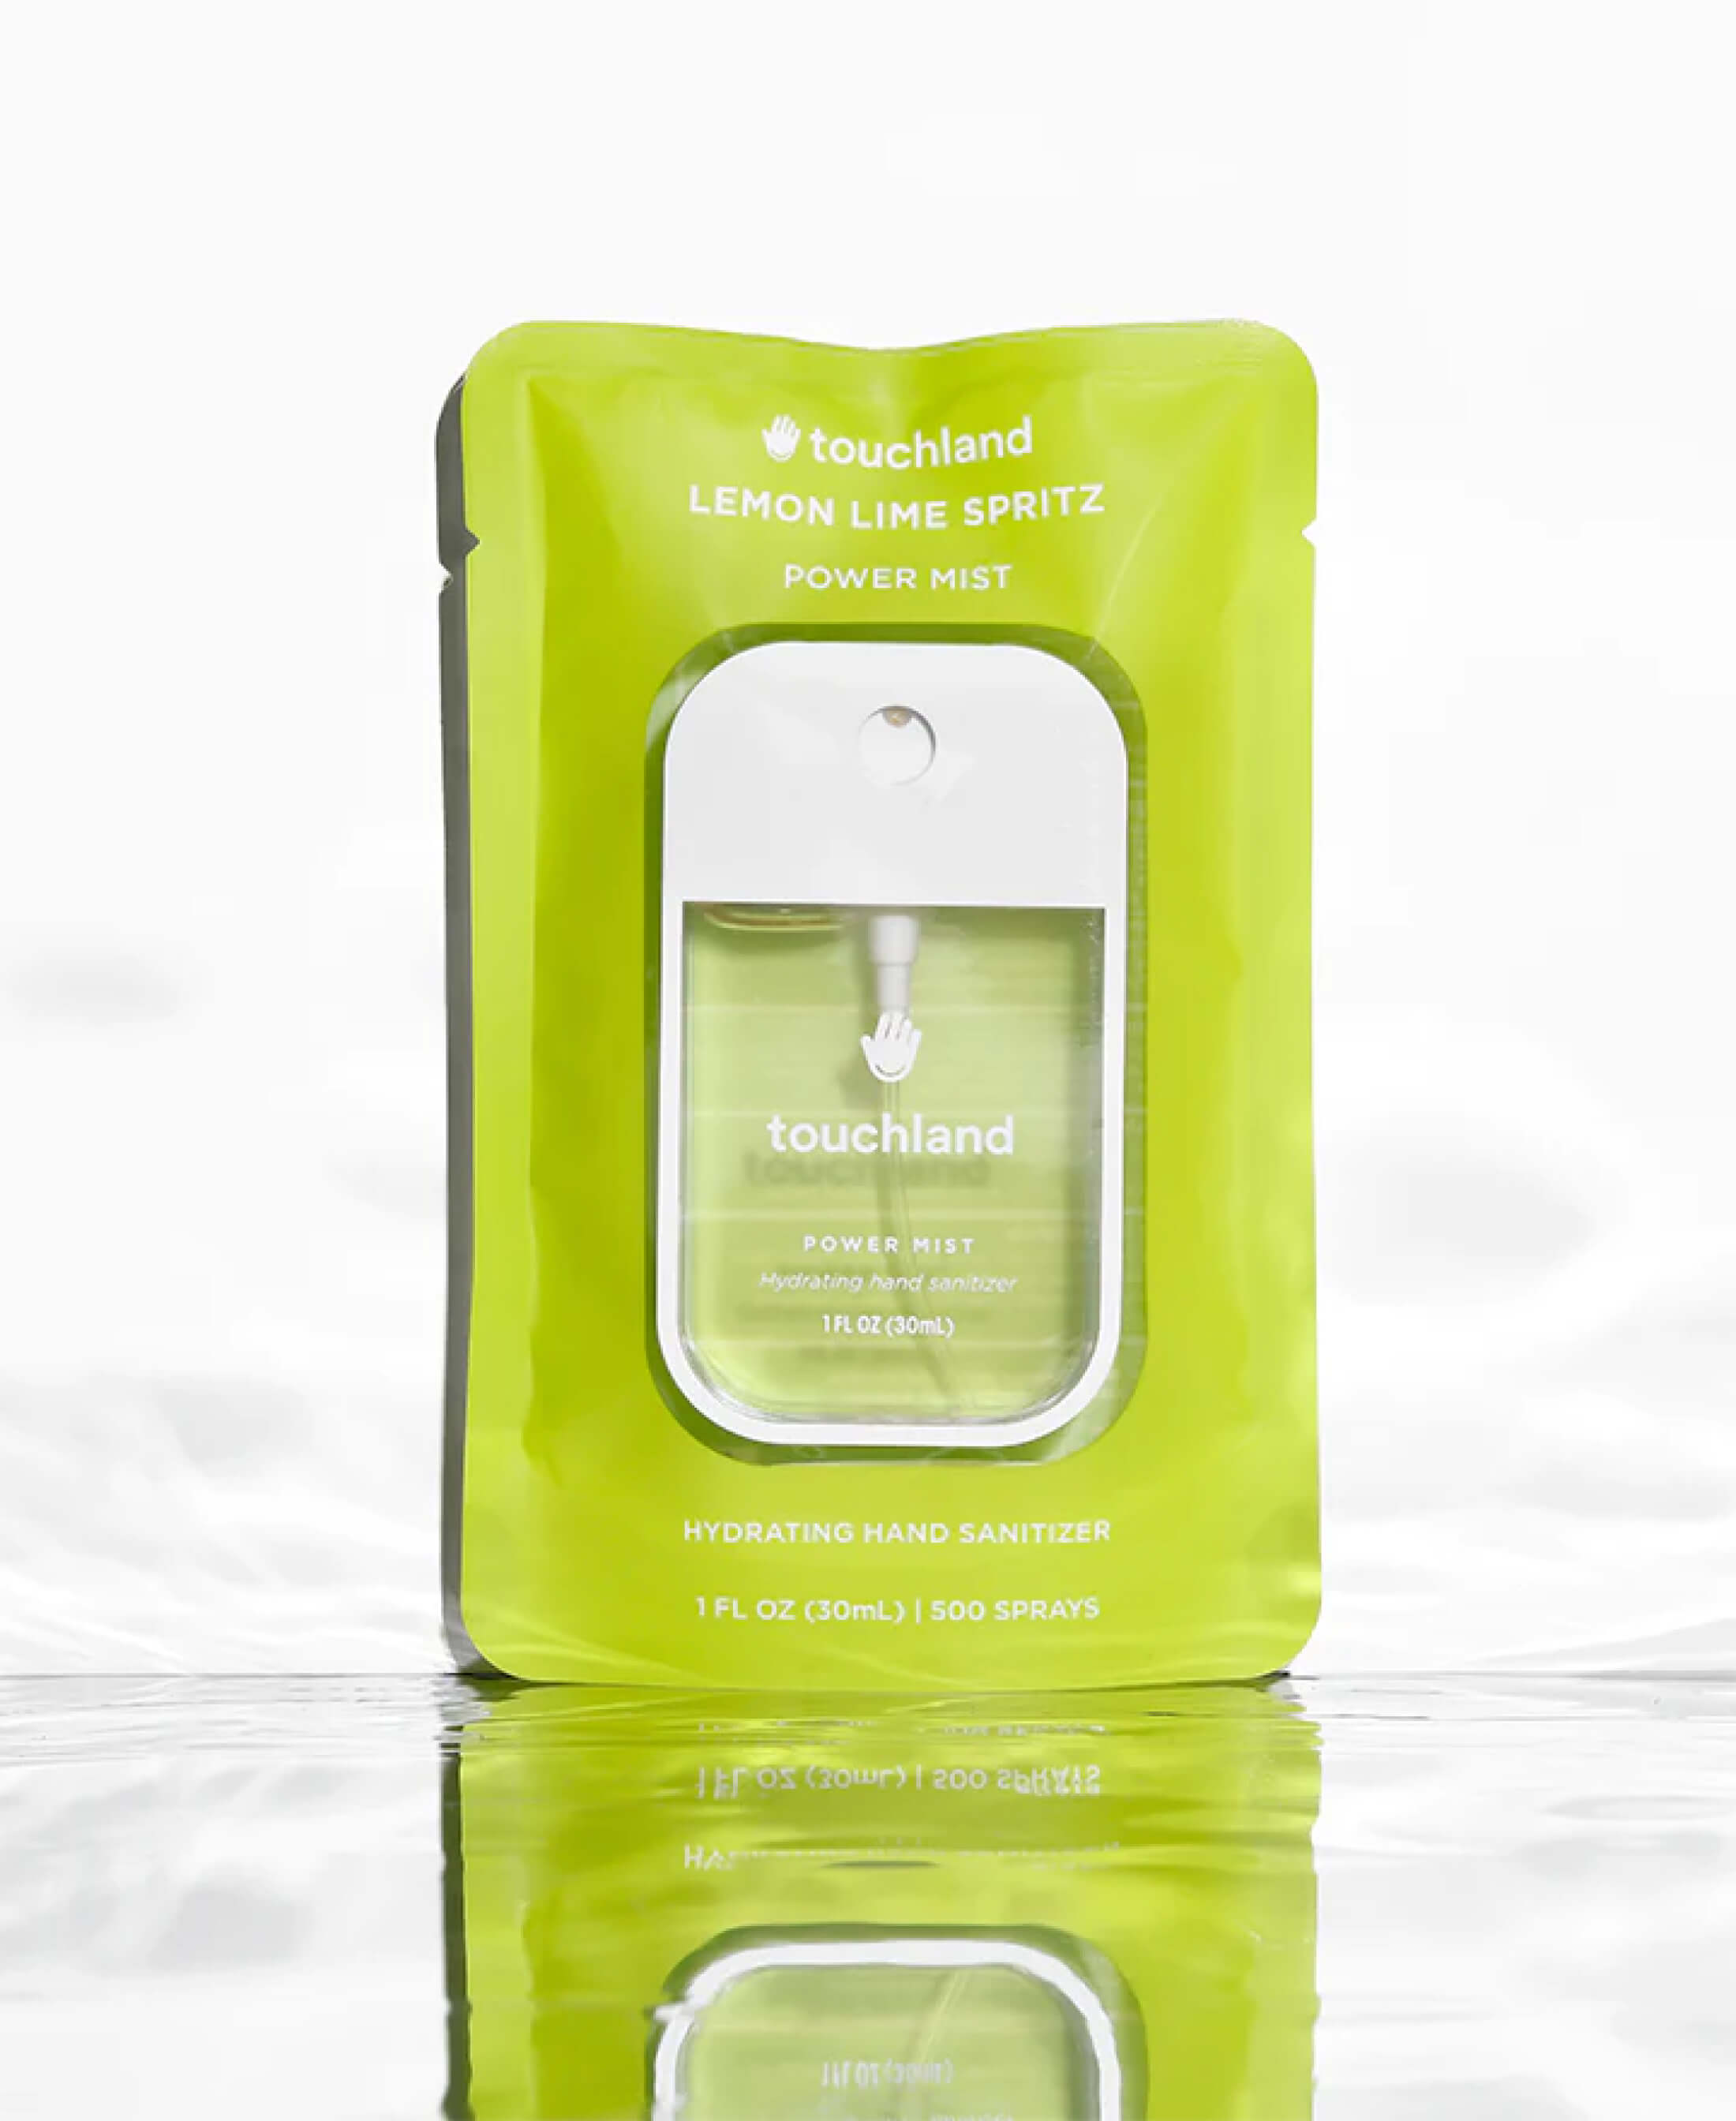 Touchland lemon lime spritz yellow hand sanitizer in yellow packaging on white background